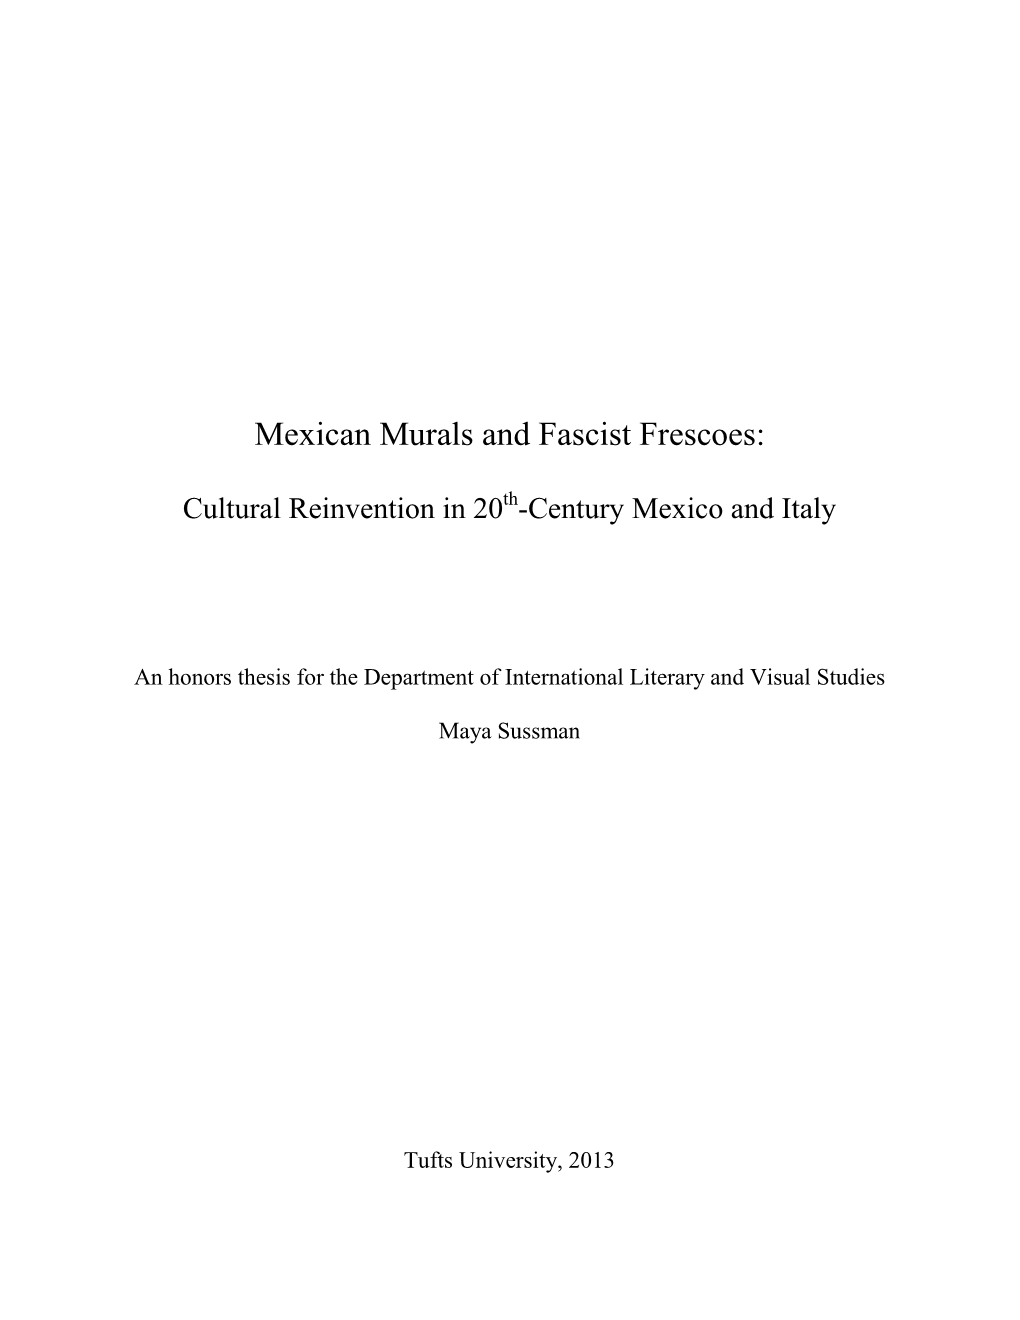 Mexican Murals and Fascist Frescoes